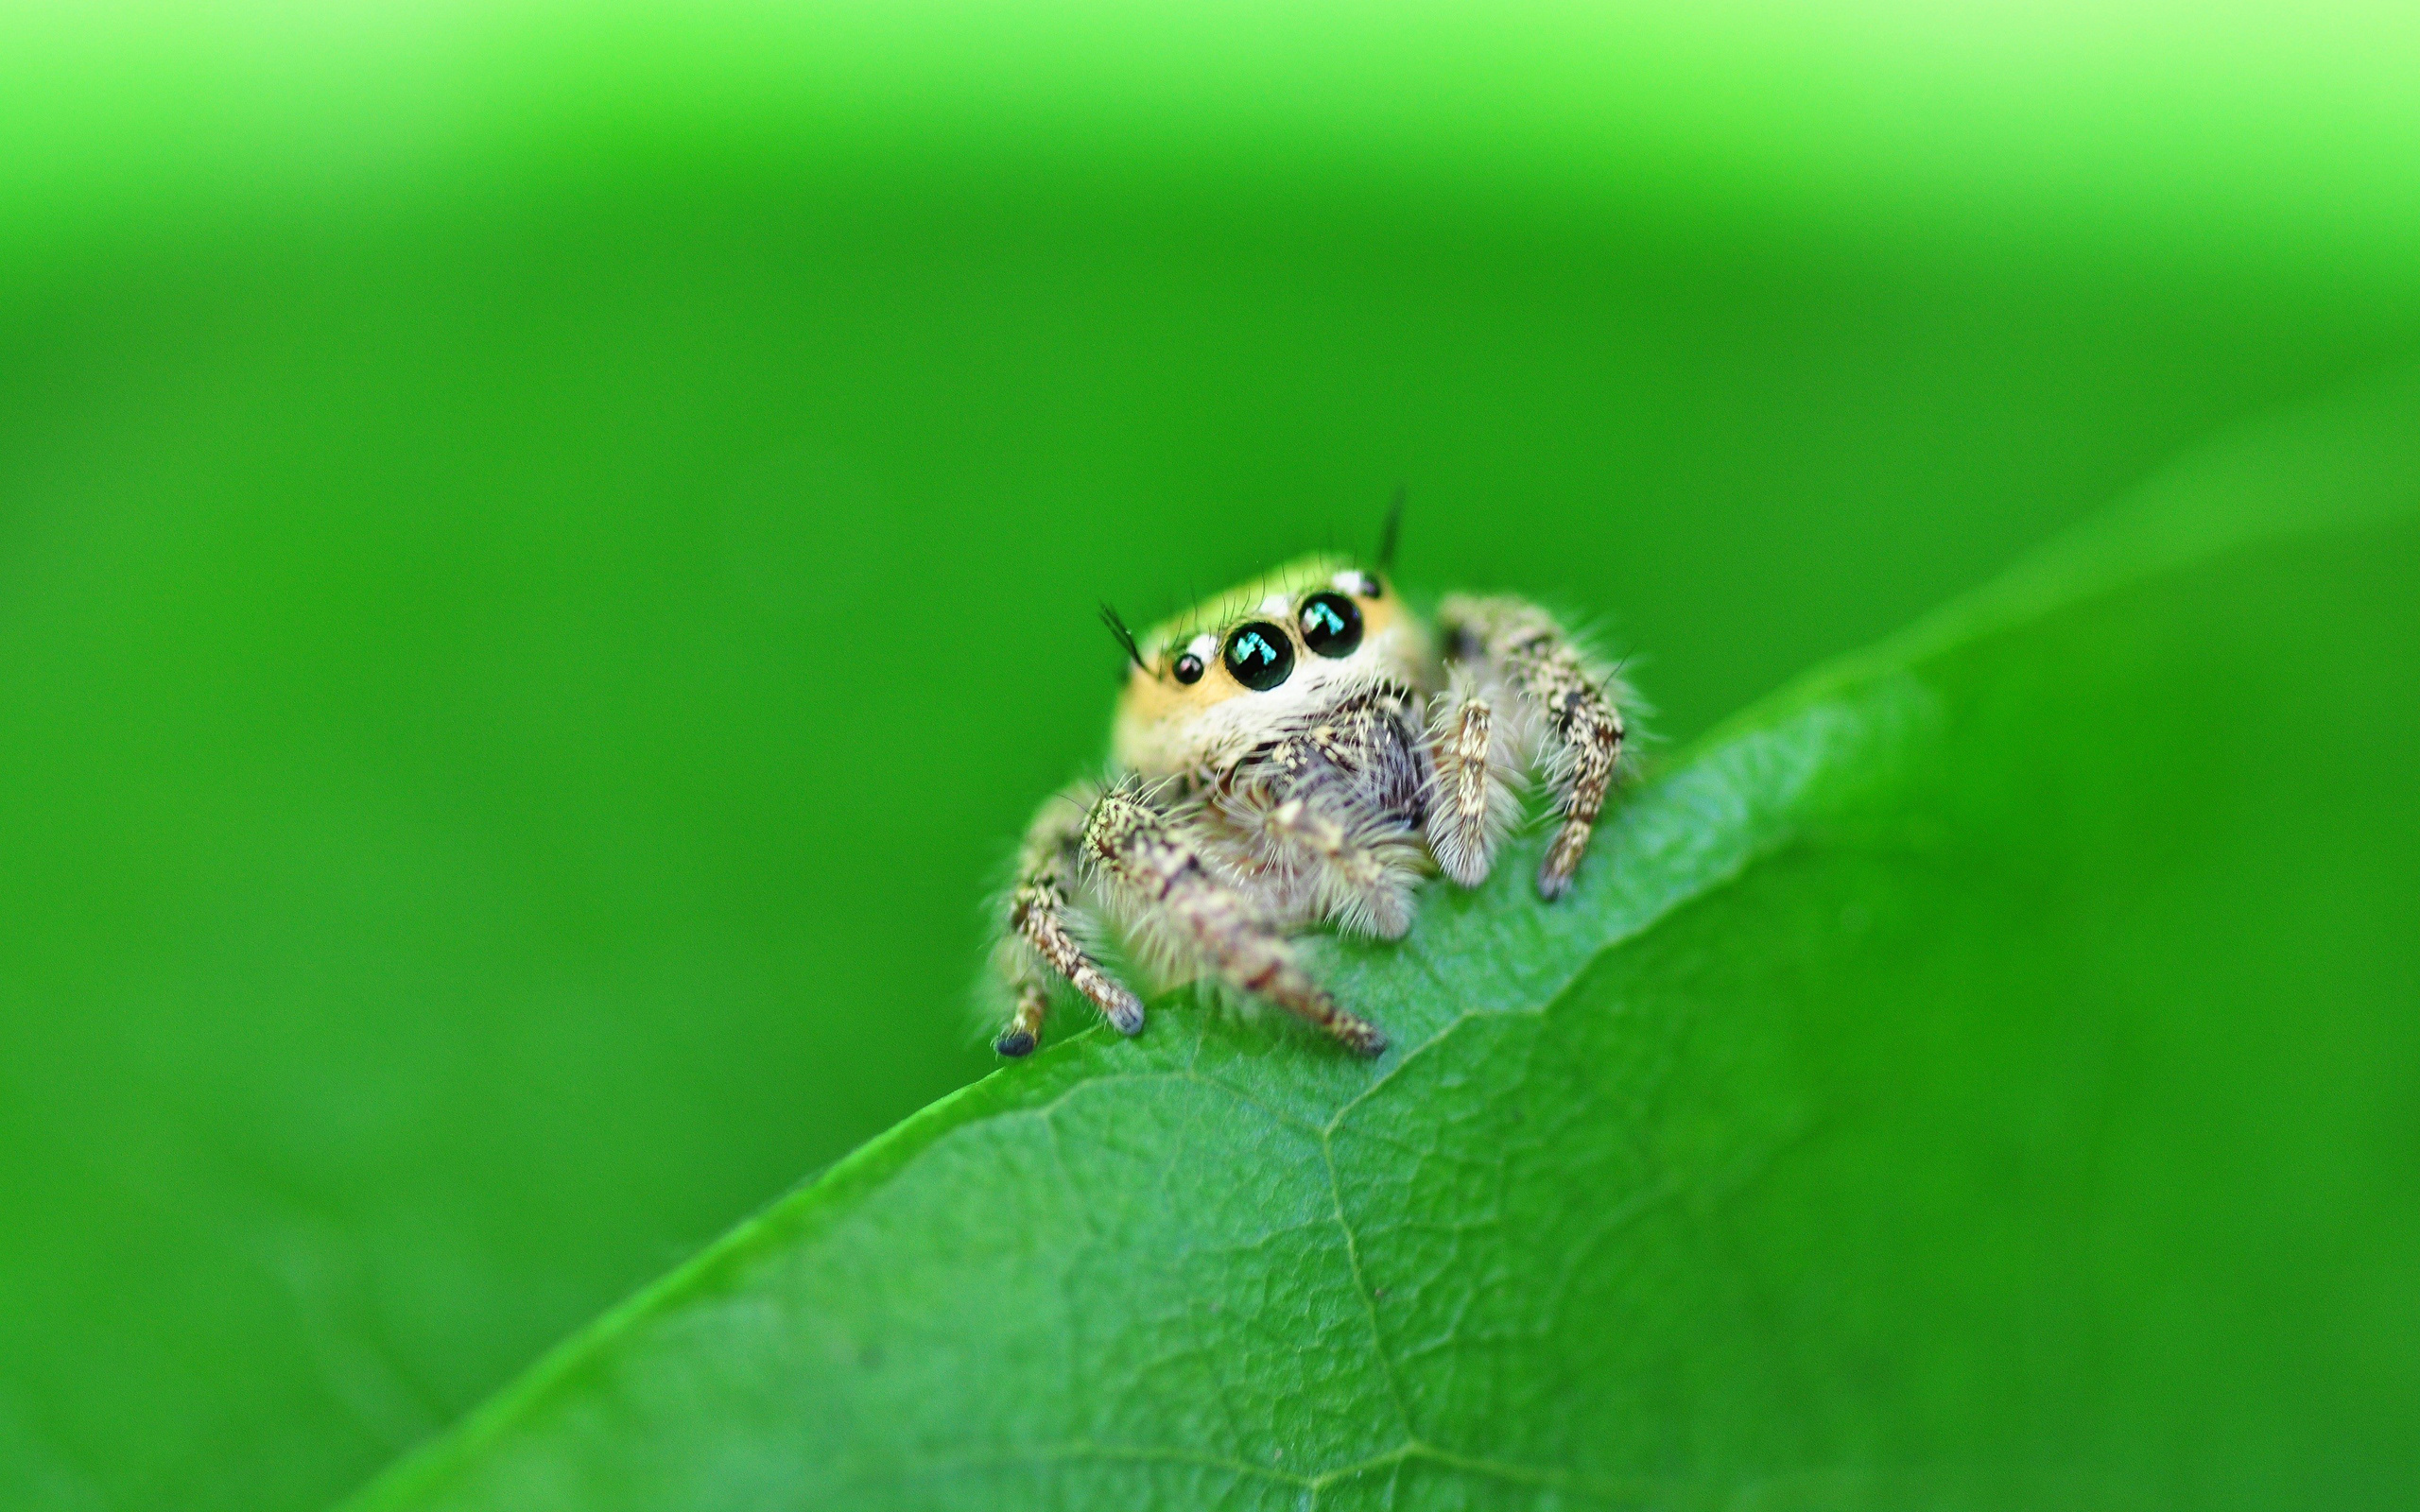 Jumping spider collection, Colorful spiders, Rapid movement, Wallpaper material, 2560x1600 HD Desktop